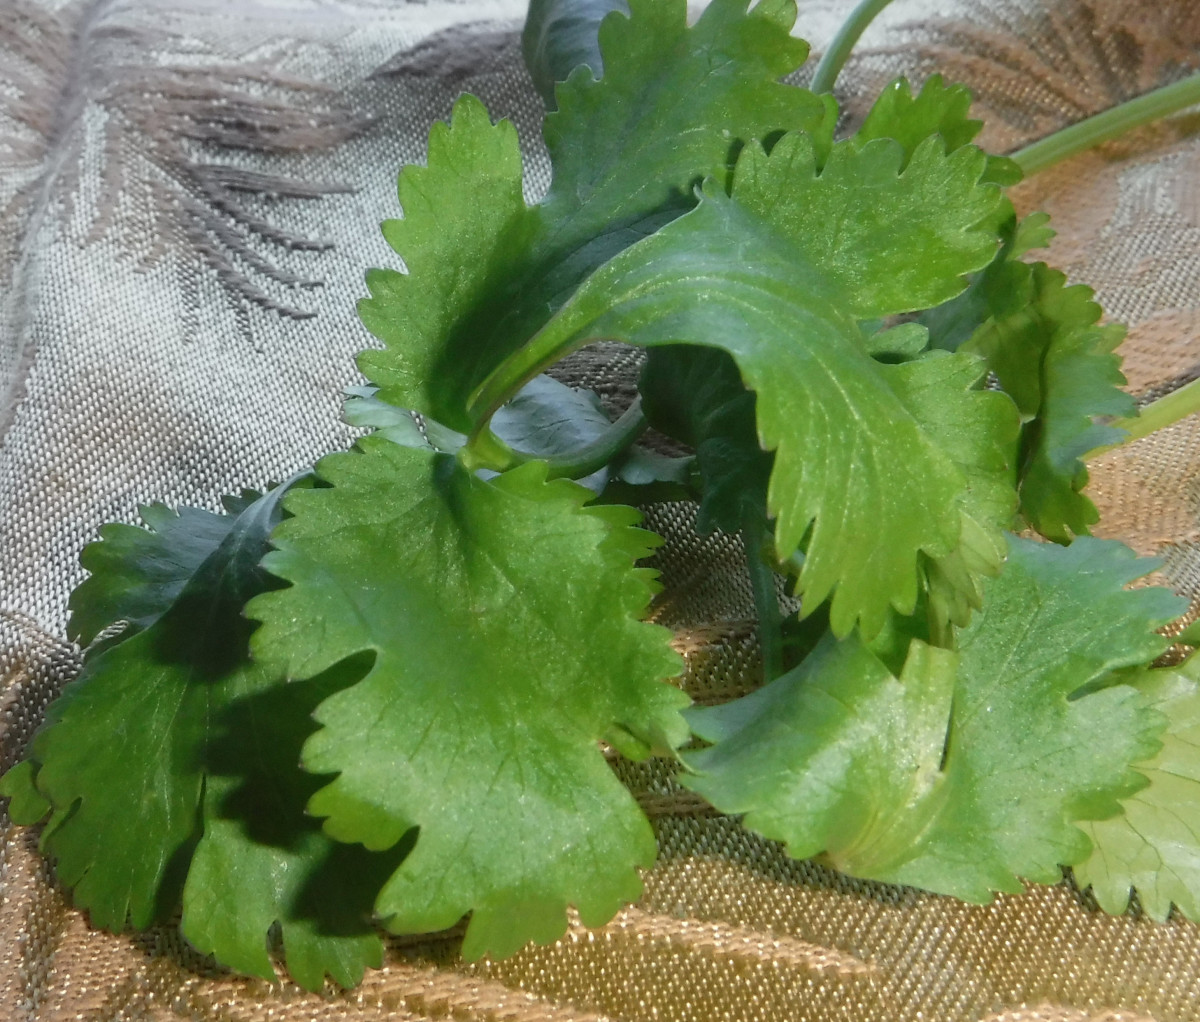 The cilantro leaves are classified as herbs in the culinary industry.